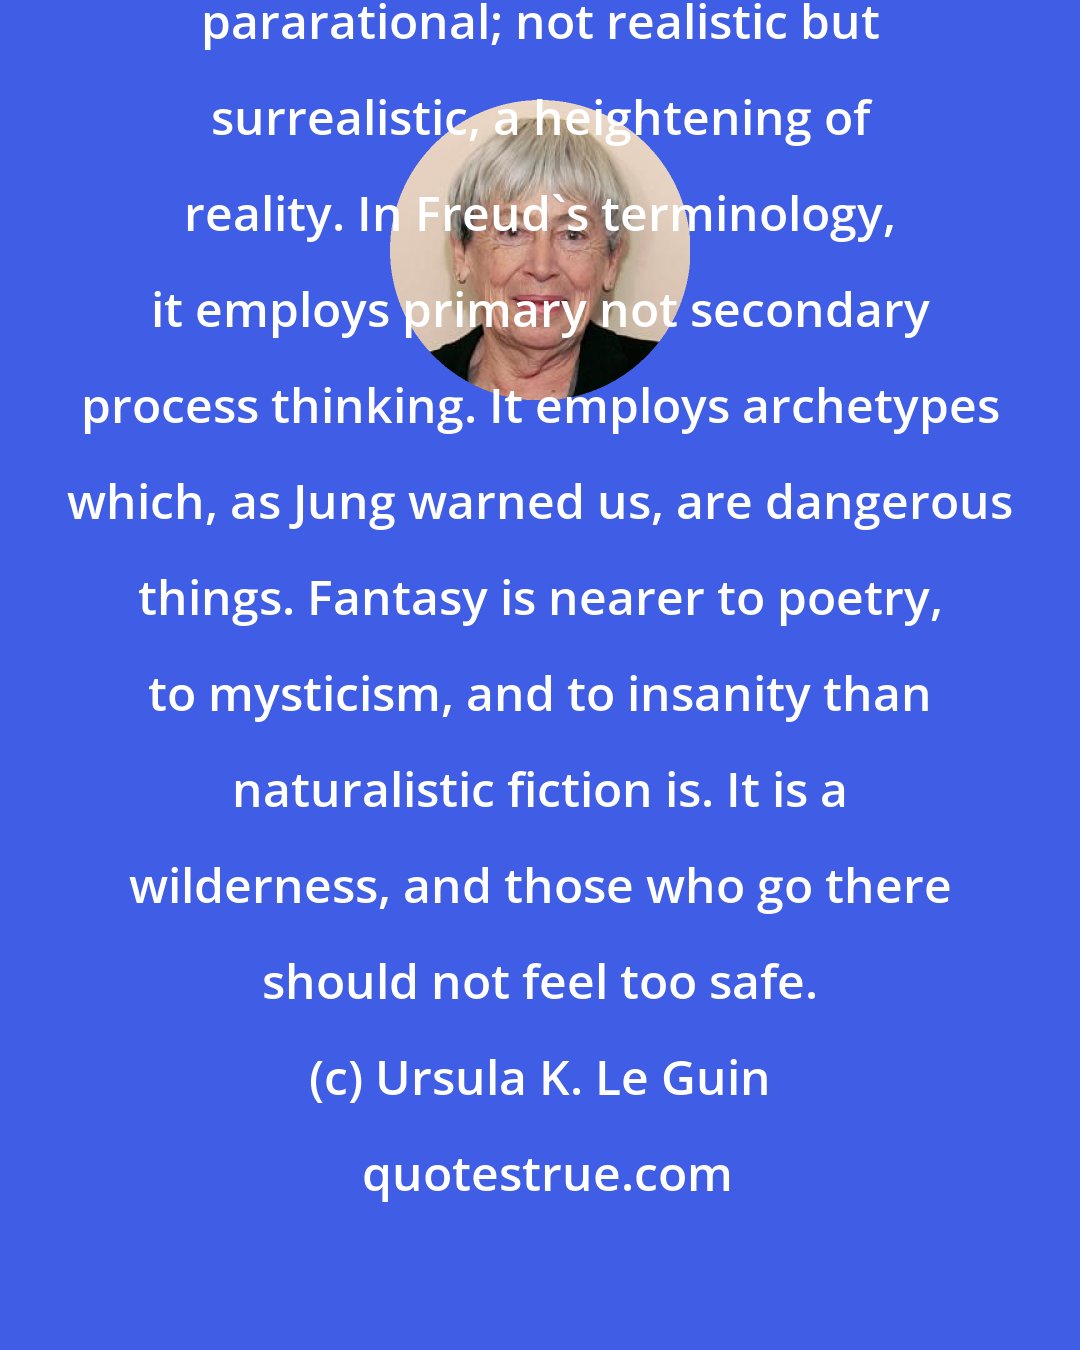 Ursula K. Le Guin: Fantasy is not antirational, but pararational; not realistic but surrealistic, a heightening of reality. In Freud's terminology, it employs primary not secondary process thinking. It employs archetypes which, as Jung warned us, are dangerous things. Fantasy is nearer to poetry, to mysticism, and to insanity than naturalistic fiction is. It is a wilderness, and those who go there should not feel too safe.